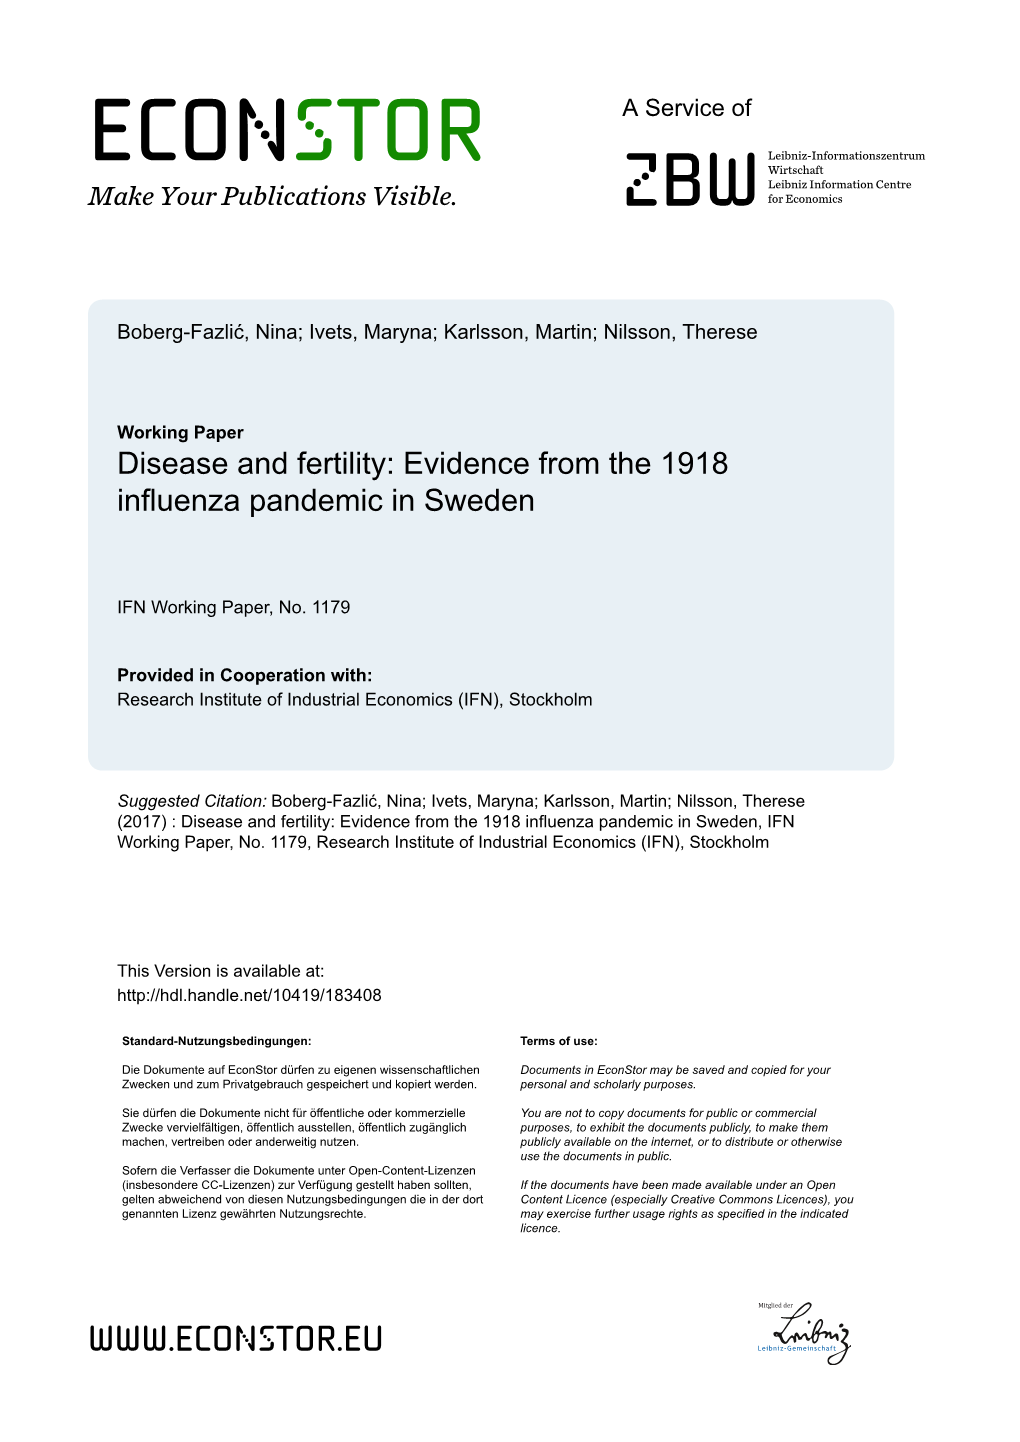 Evidence from the 1918 Influenza Pandemic in Sweden